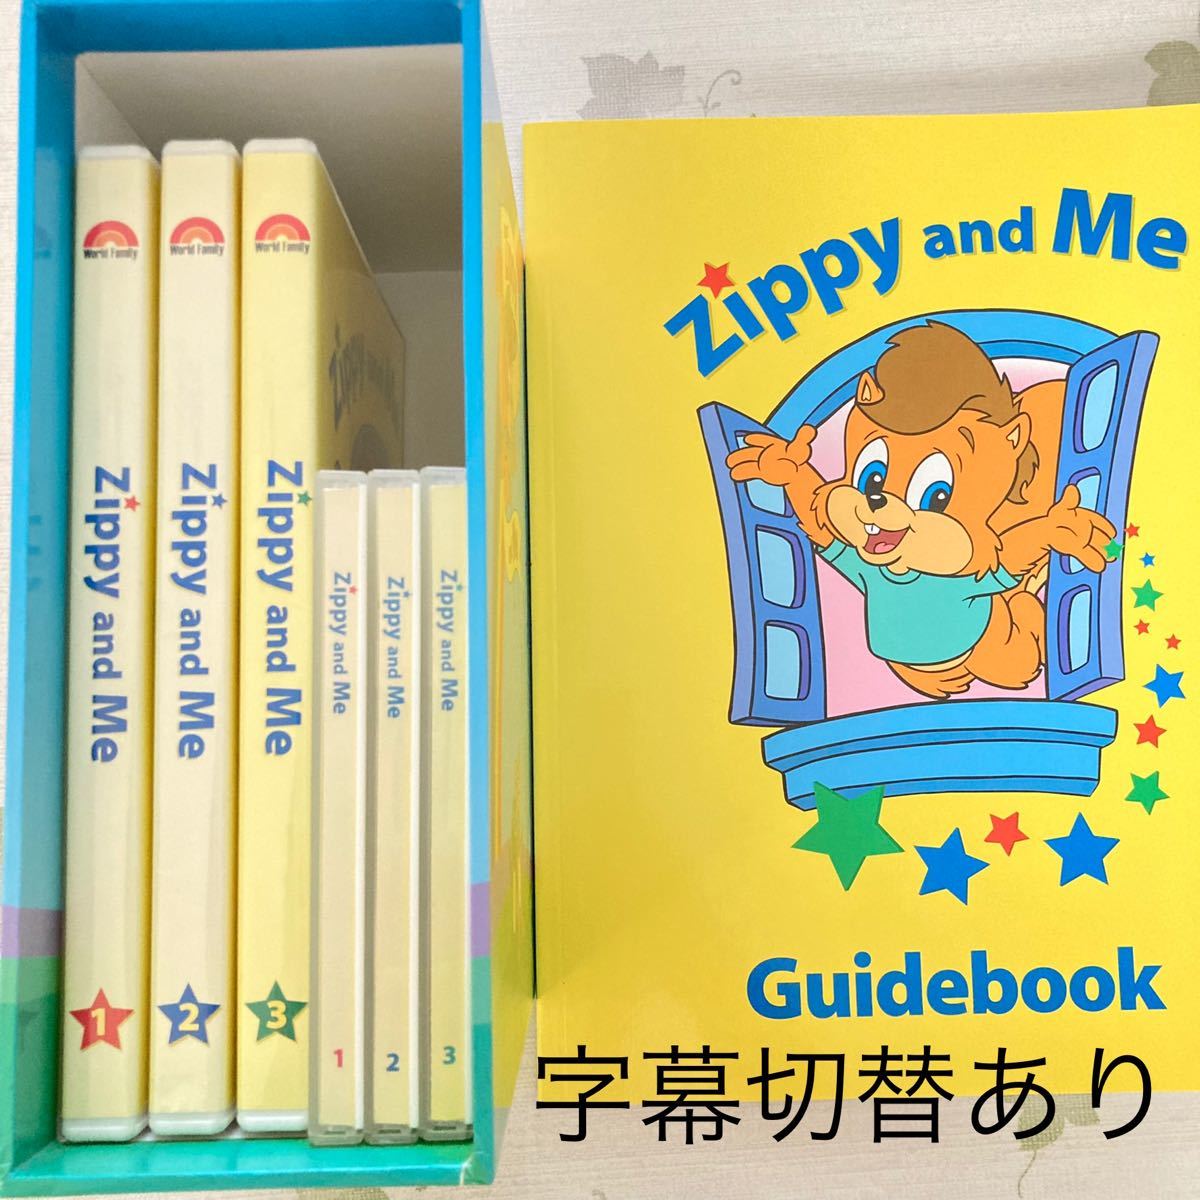 Zippy and Me CD DVD Guide bookワールドファミリー-